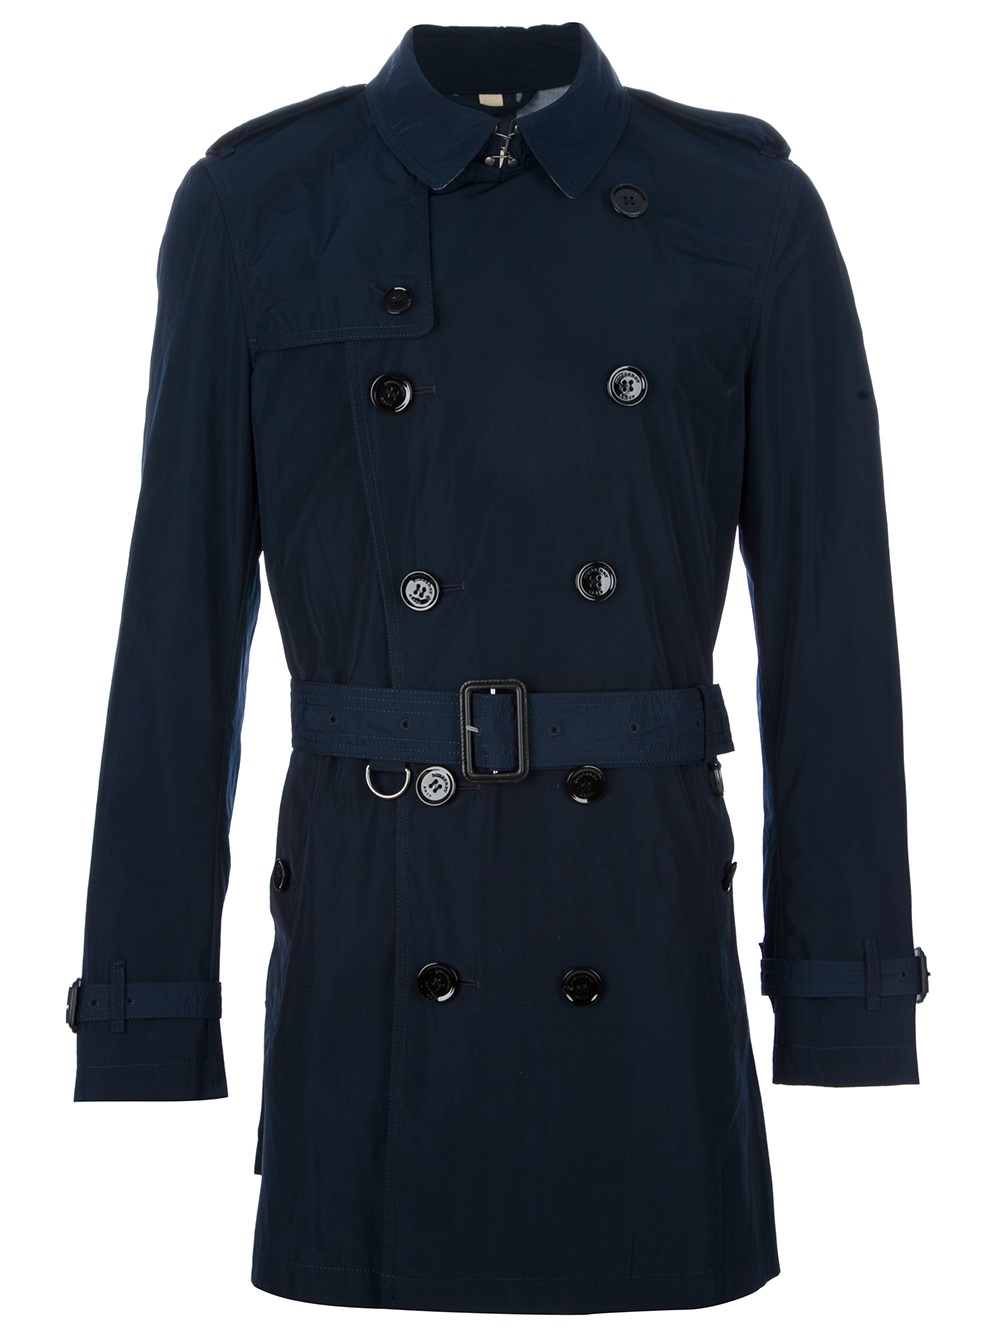 Lyst - Burberry brit Britton Trench Coat in Blue for Men